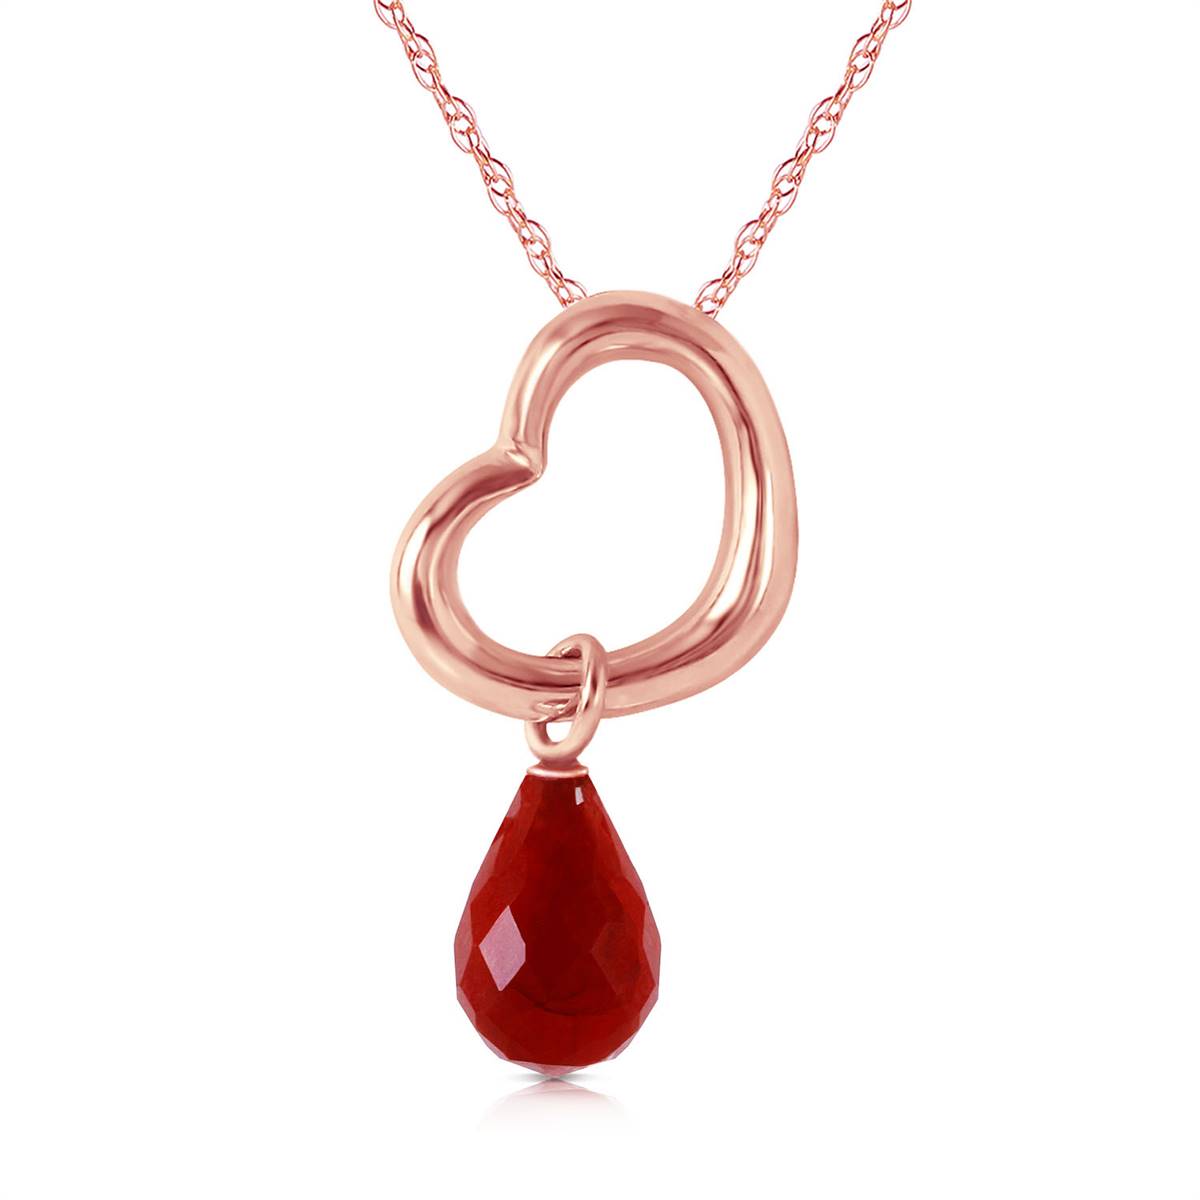 14K Solid Rose Gold Heart Necklace w/ Dangling Natural Ruby